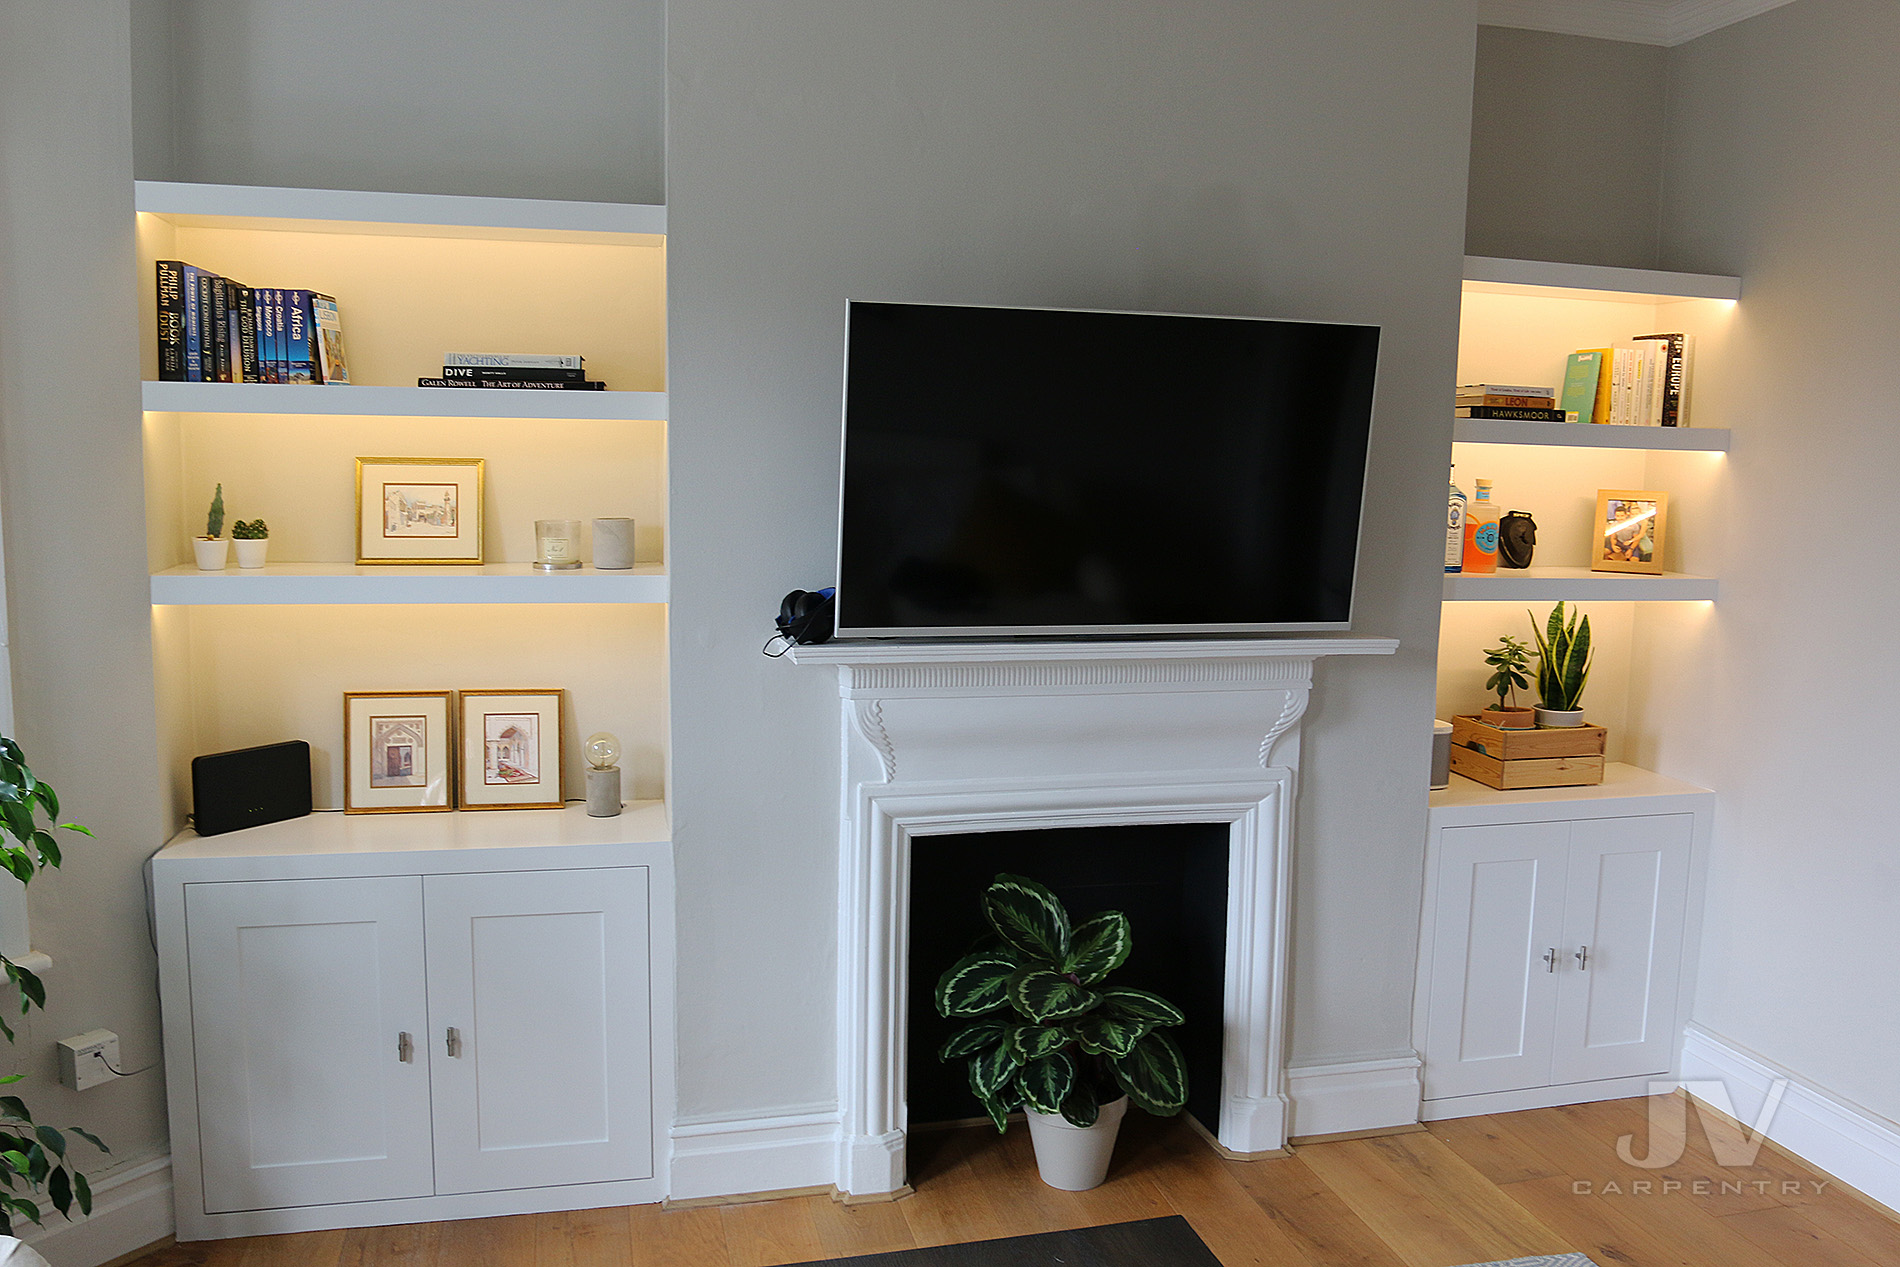 alcove bookshelves with light and cabinet either side of the chimney breast